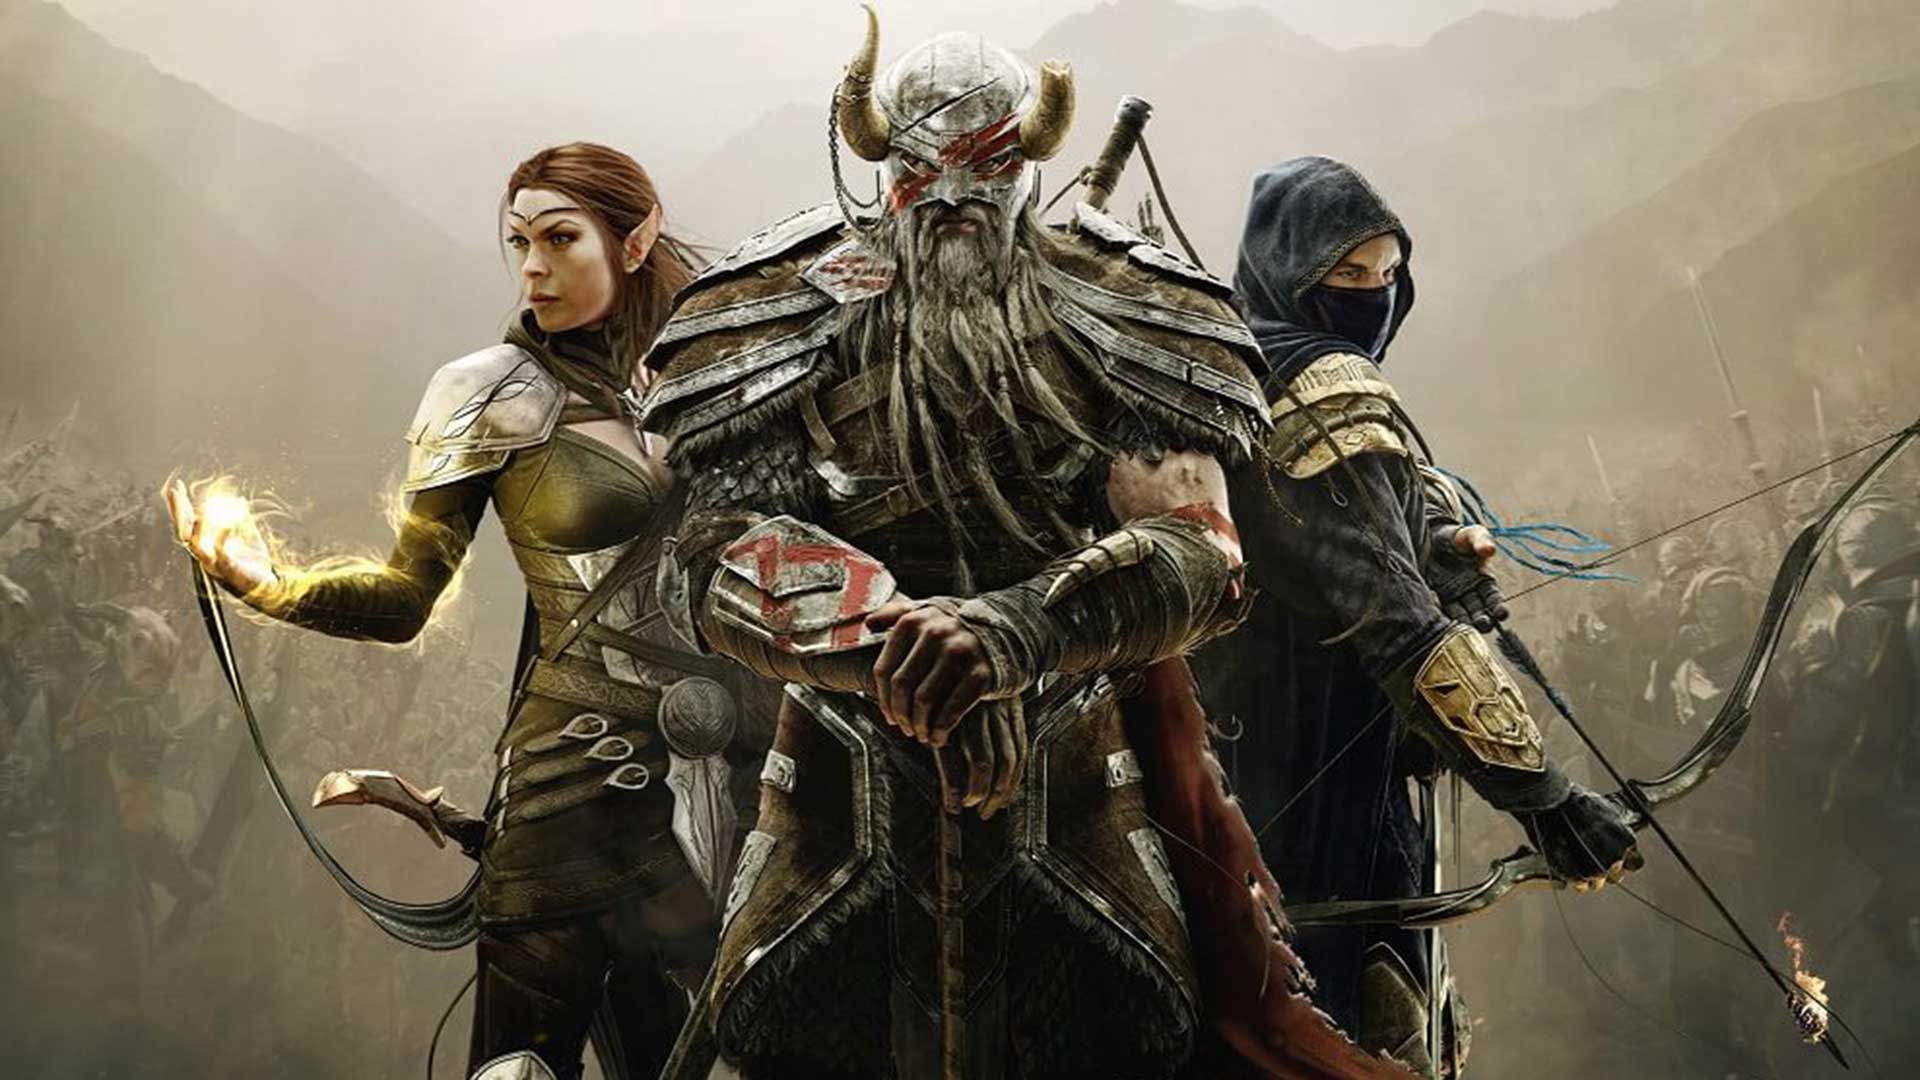 The Elder Scrolls Online free on the Epic Games Store